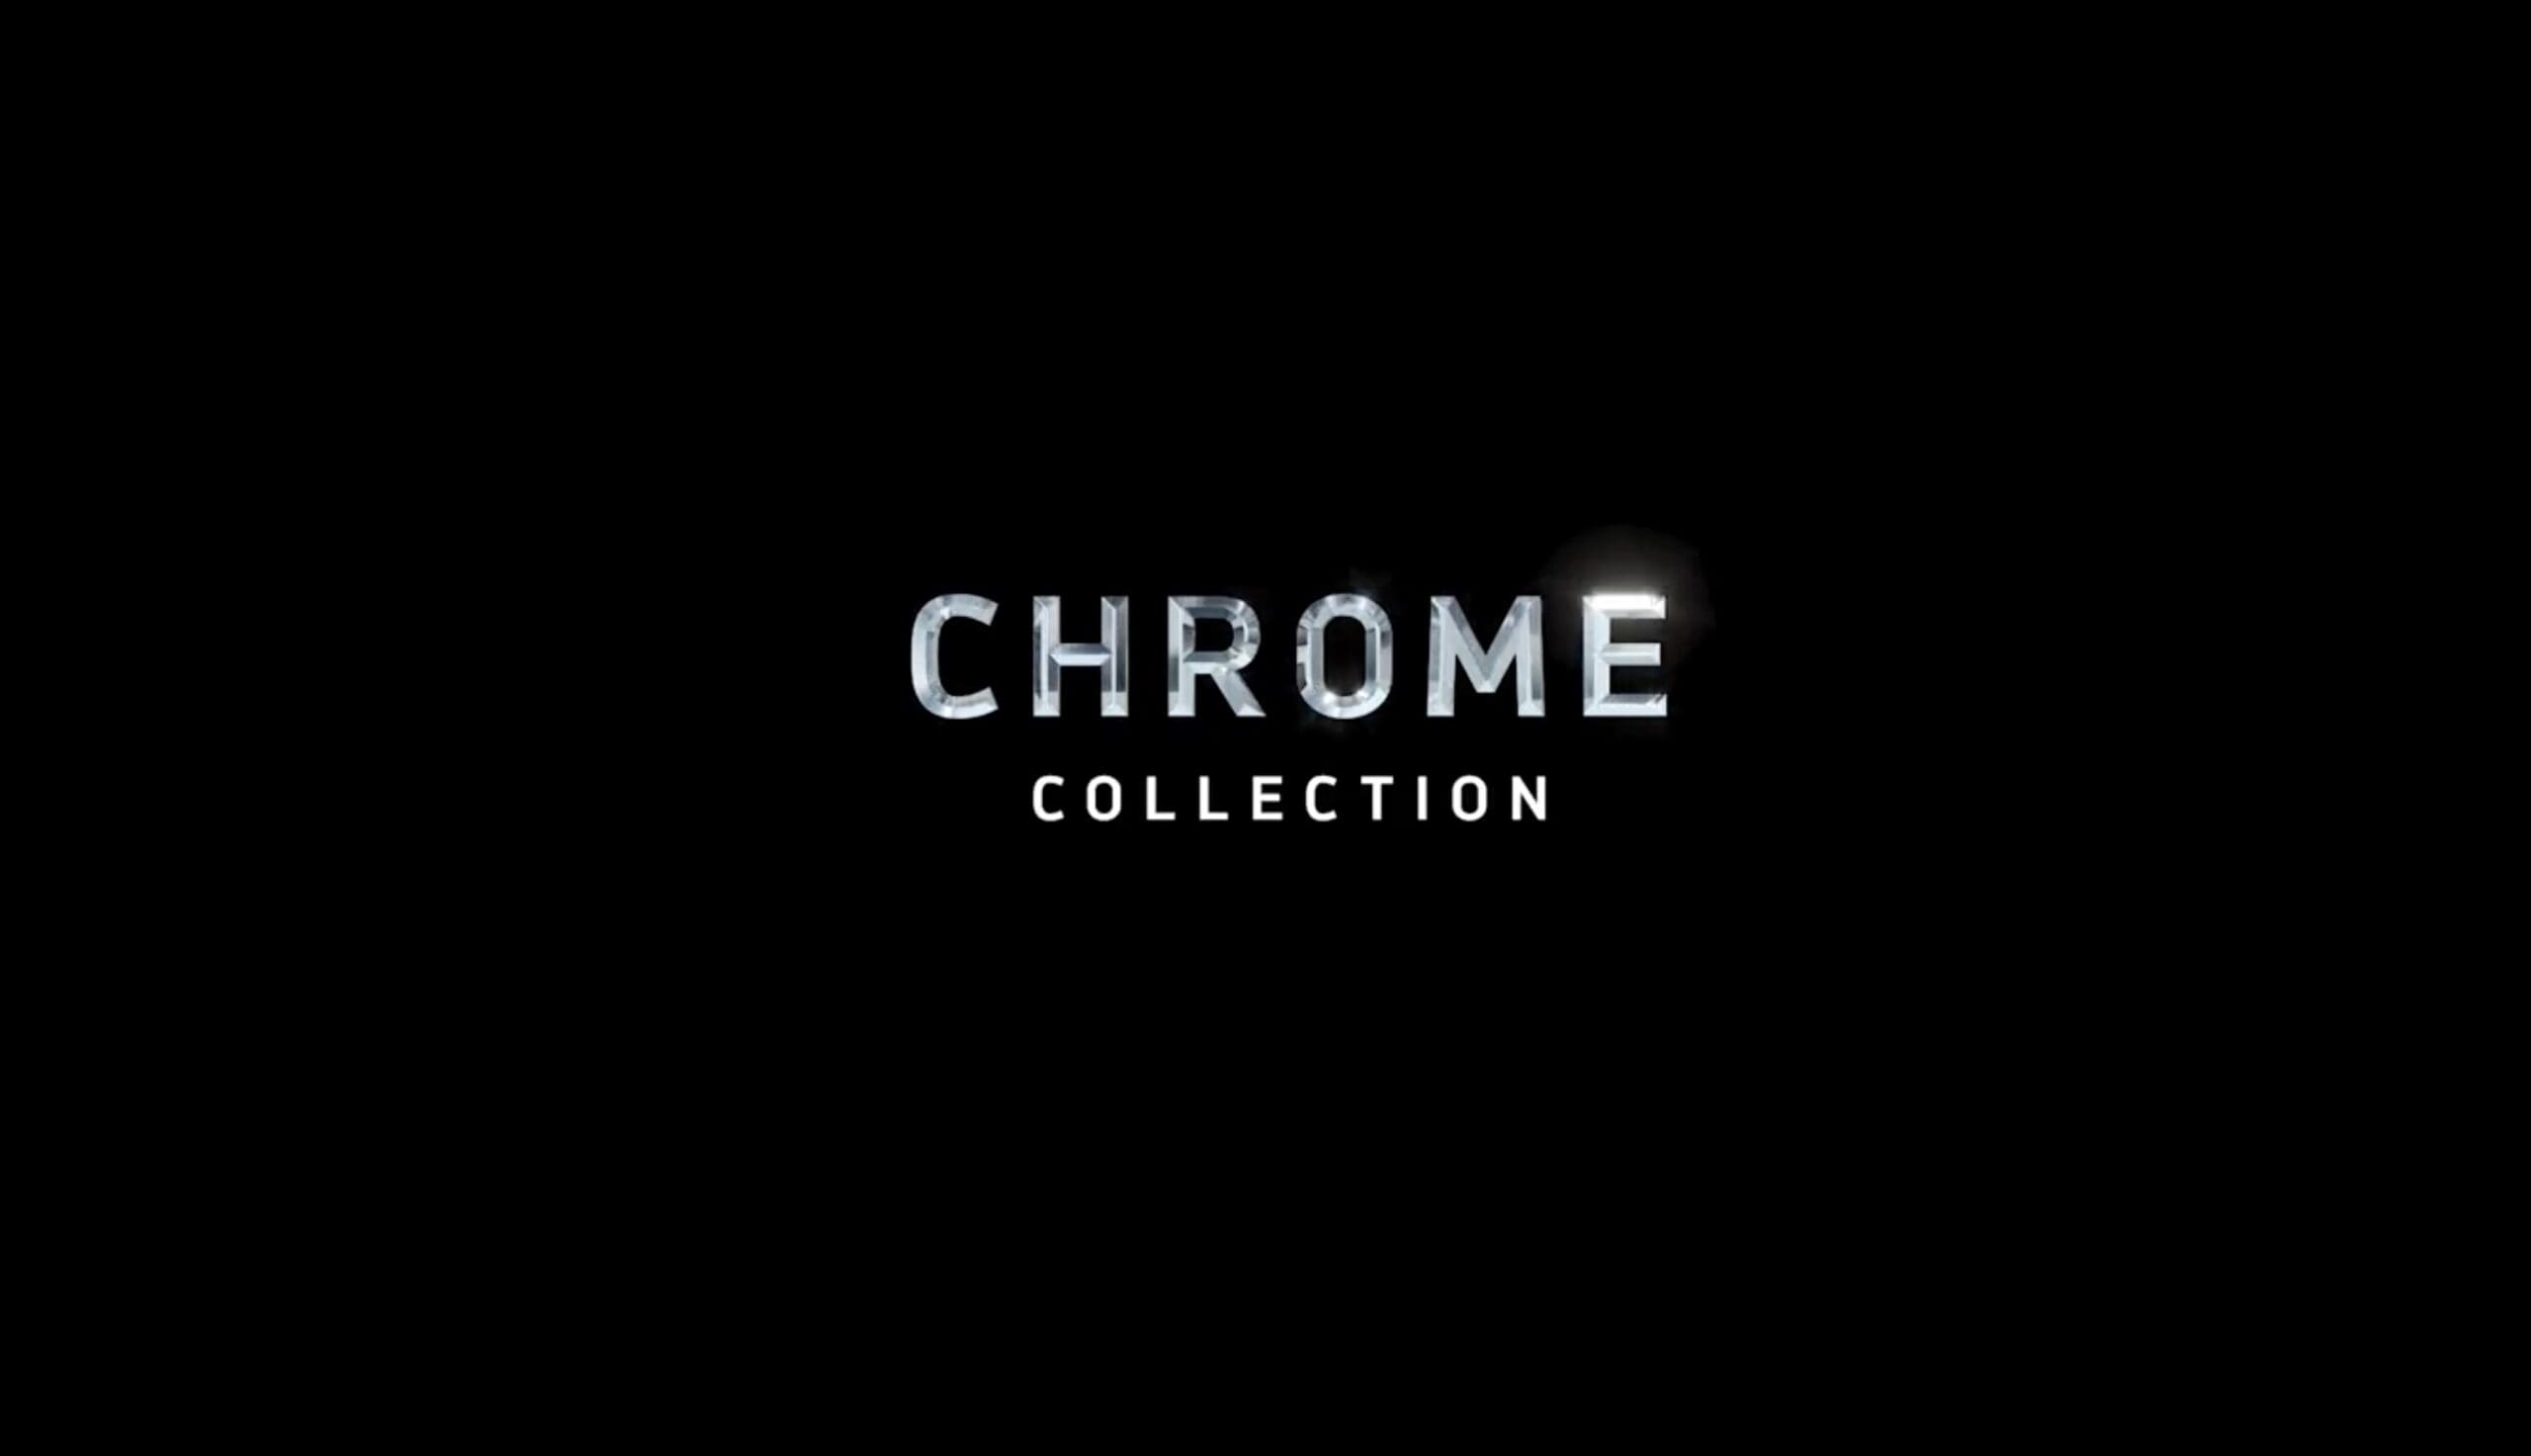 Triumph's upcoming Chrome Collection. Media sourced from Triumph's Twitter account.